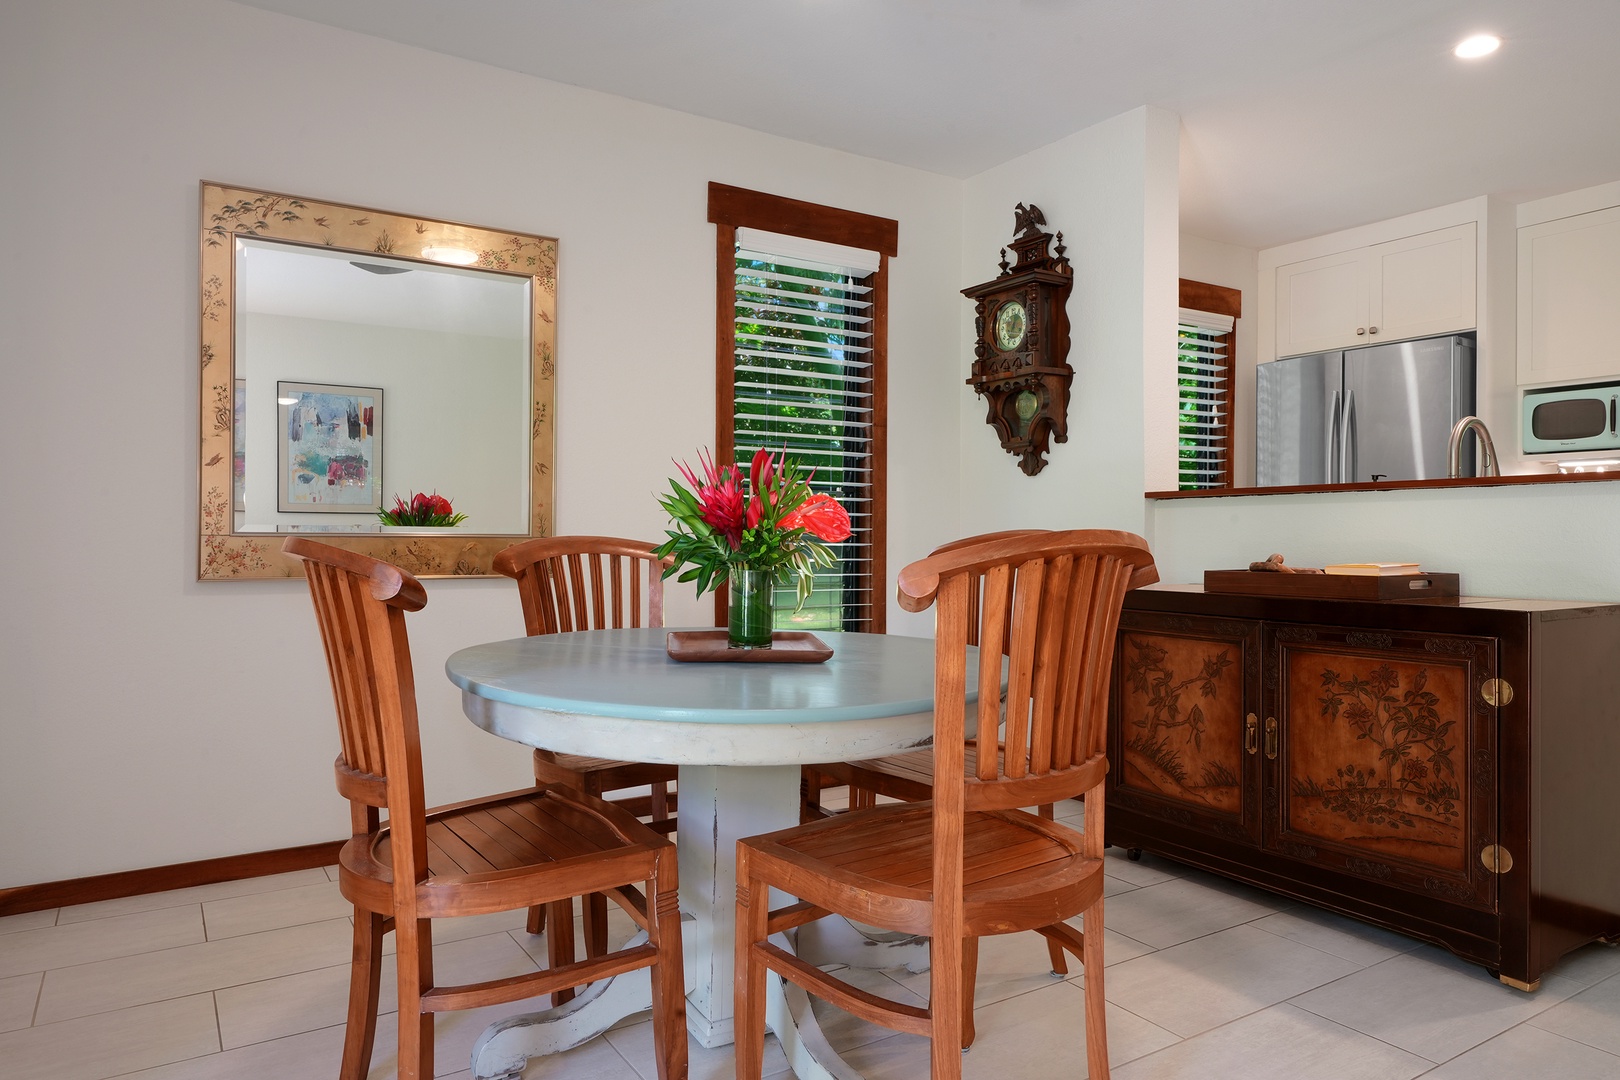 Koloa Vacation Rentals, Waikomo Streams 203 - Intimate gatherings await: a cozy dining room with a four-seat dining table perfect for shared meals